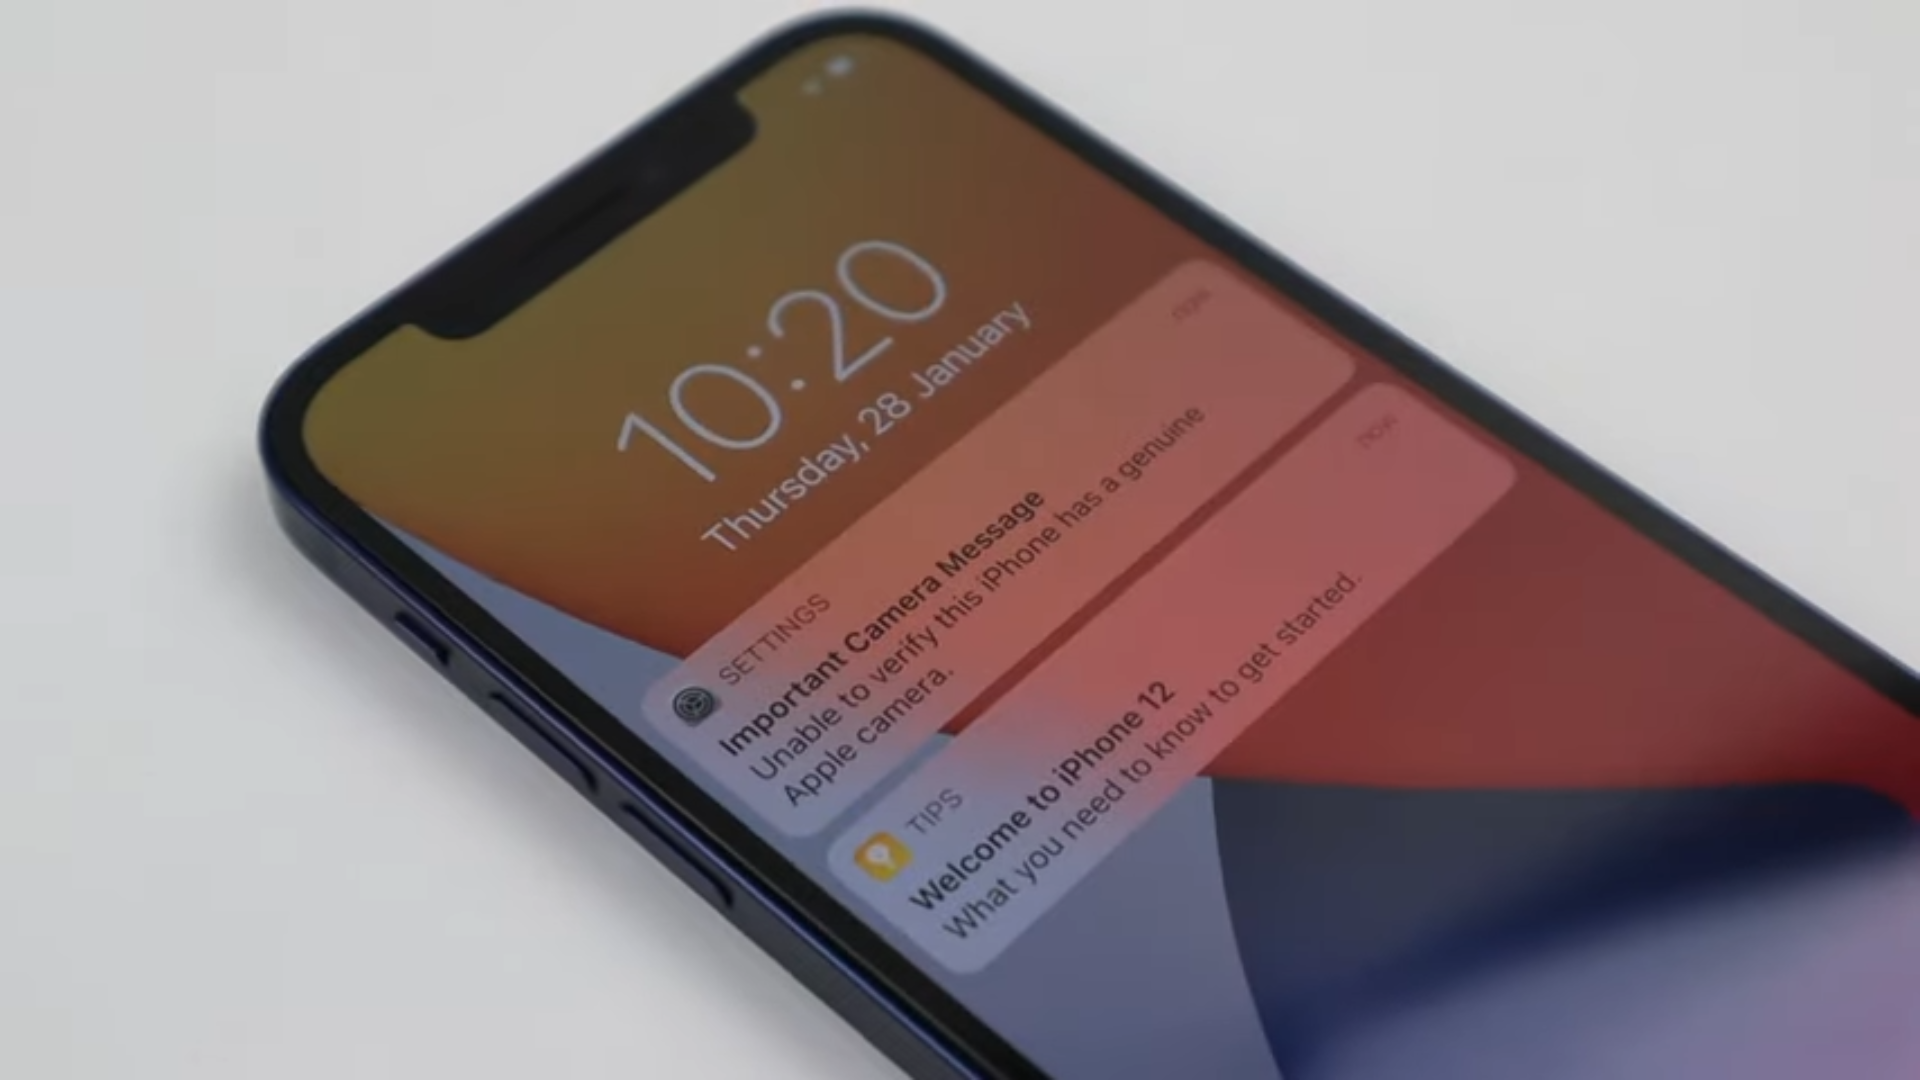 iOS 14.4 includes a new anti-independent recovery message along with security upgrades